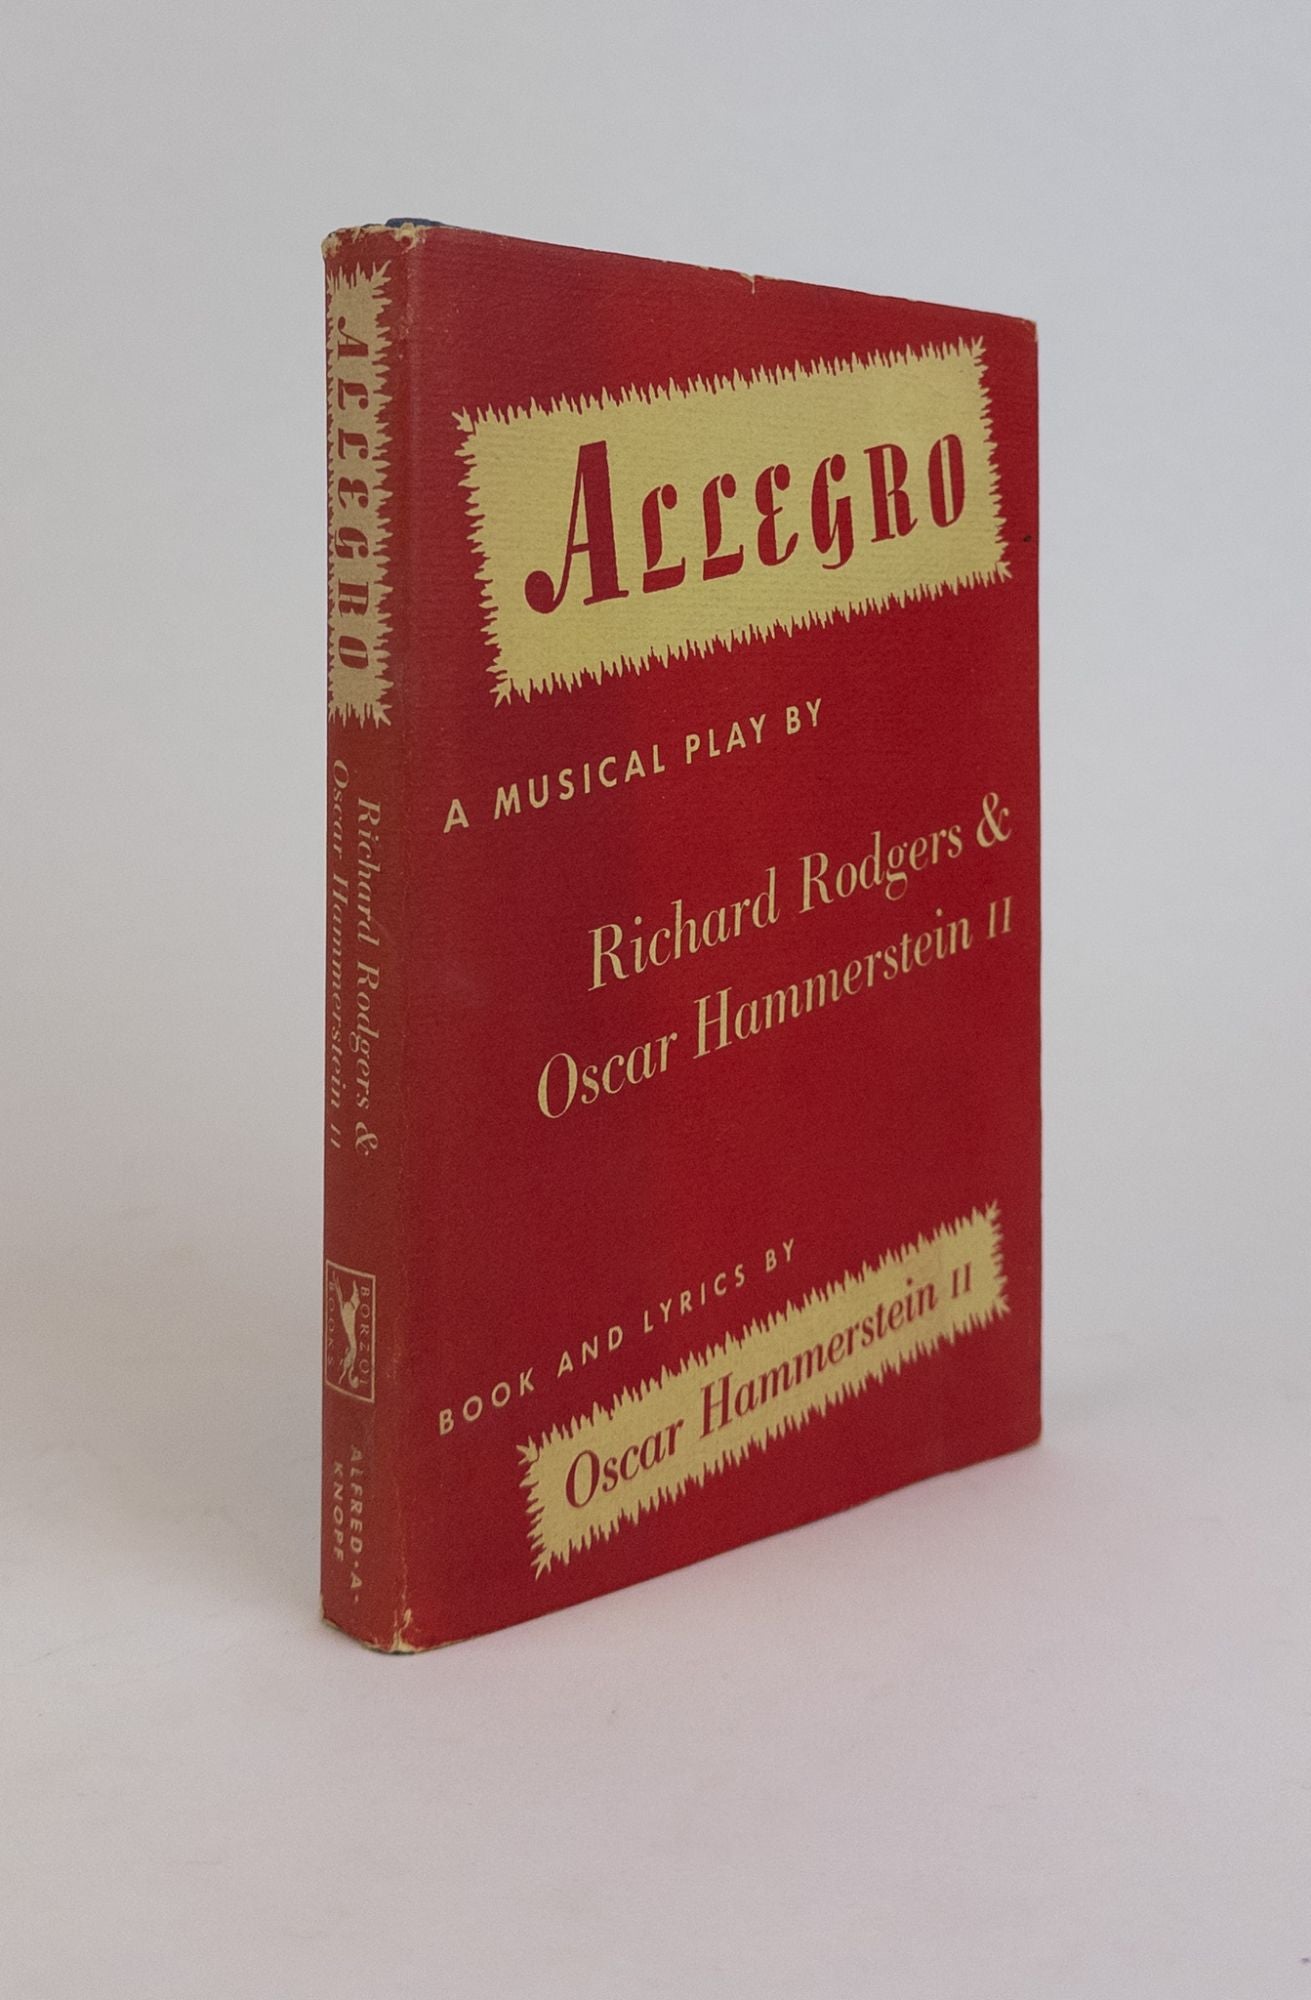 1346344 ALLEGRO [Signed by Majority of Opening Cast Plus Richard Rogers] [with] ALS BY AGNES DE MILLE [and] TLS BY HELEN HAYES. Richard Rodgers, Oscar Hammerstein II.